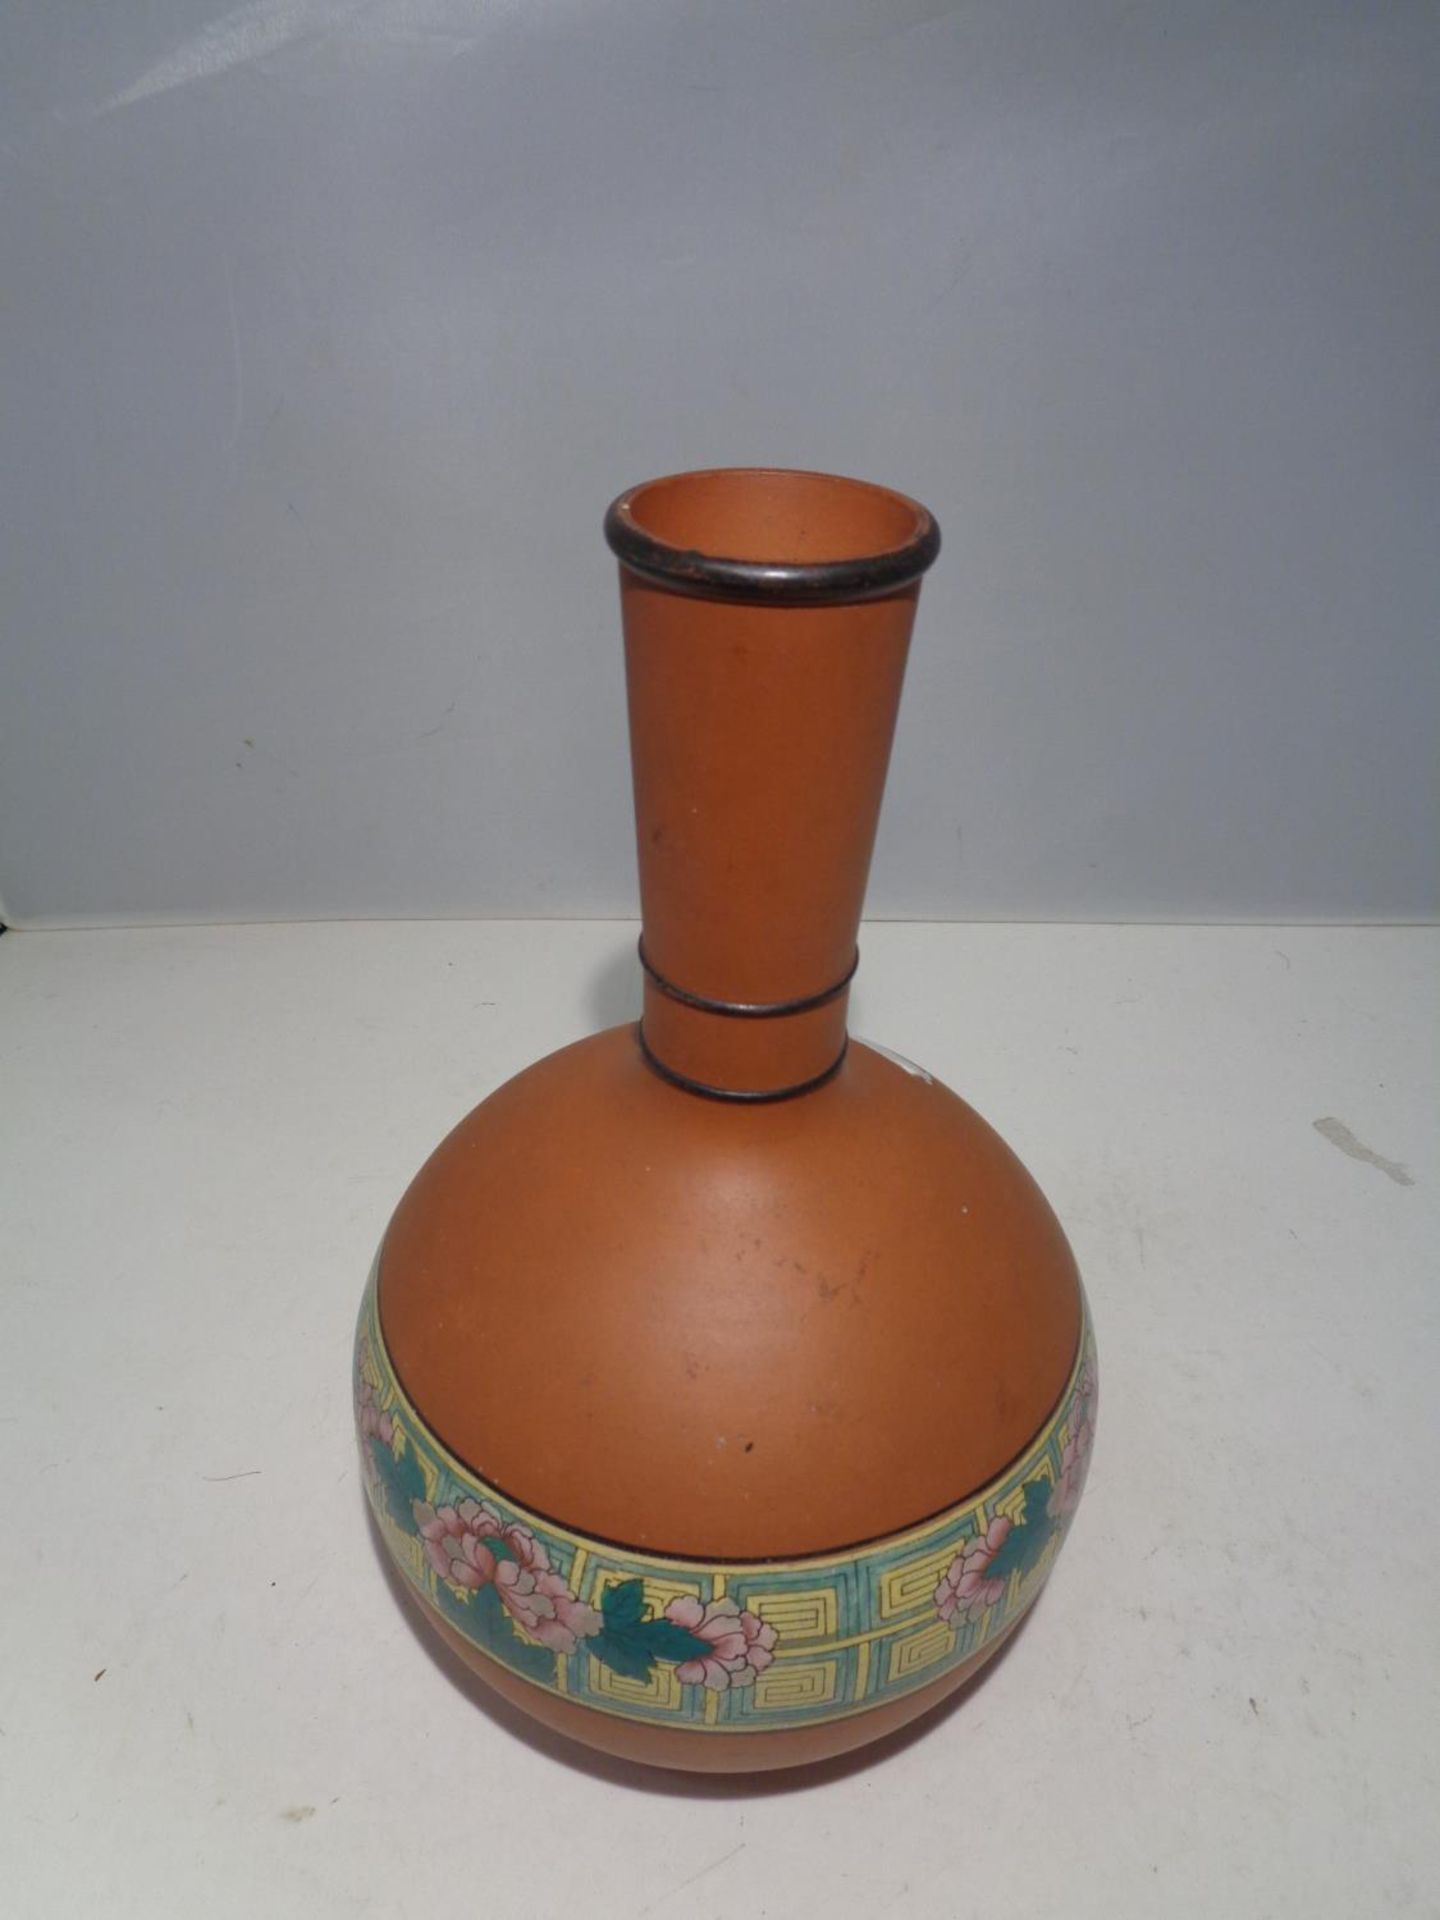 A DB &CO ETRURIA TERRACOTTA VASE WITH A FLOWER DESIGN - Image 3 of 4